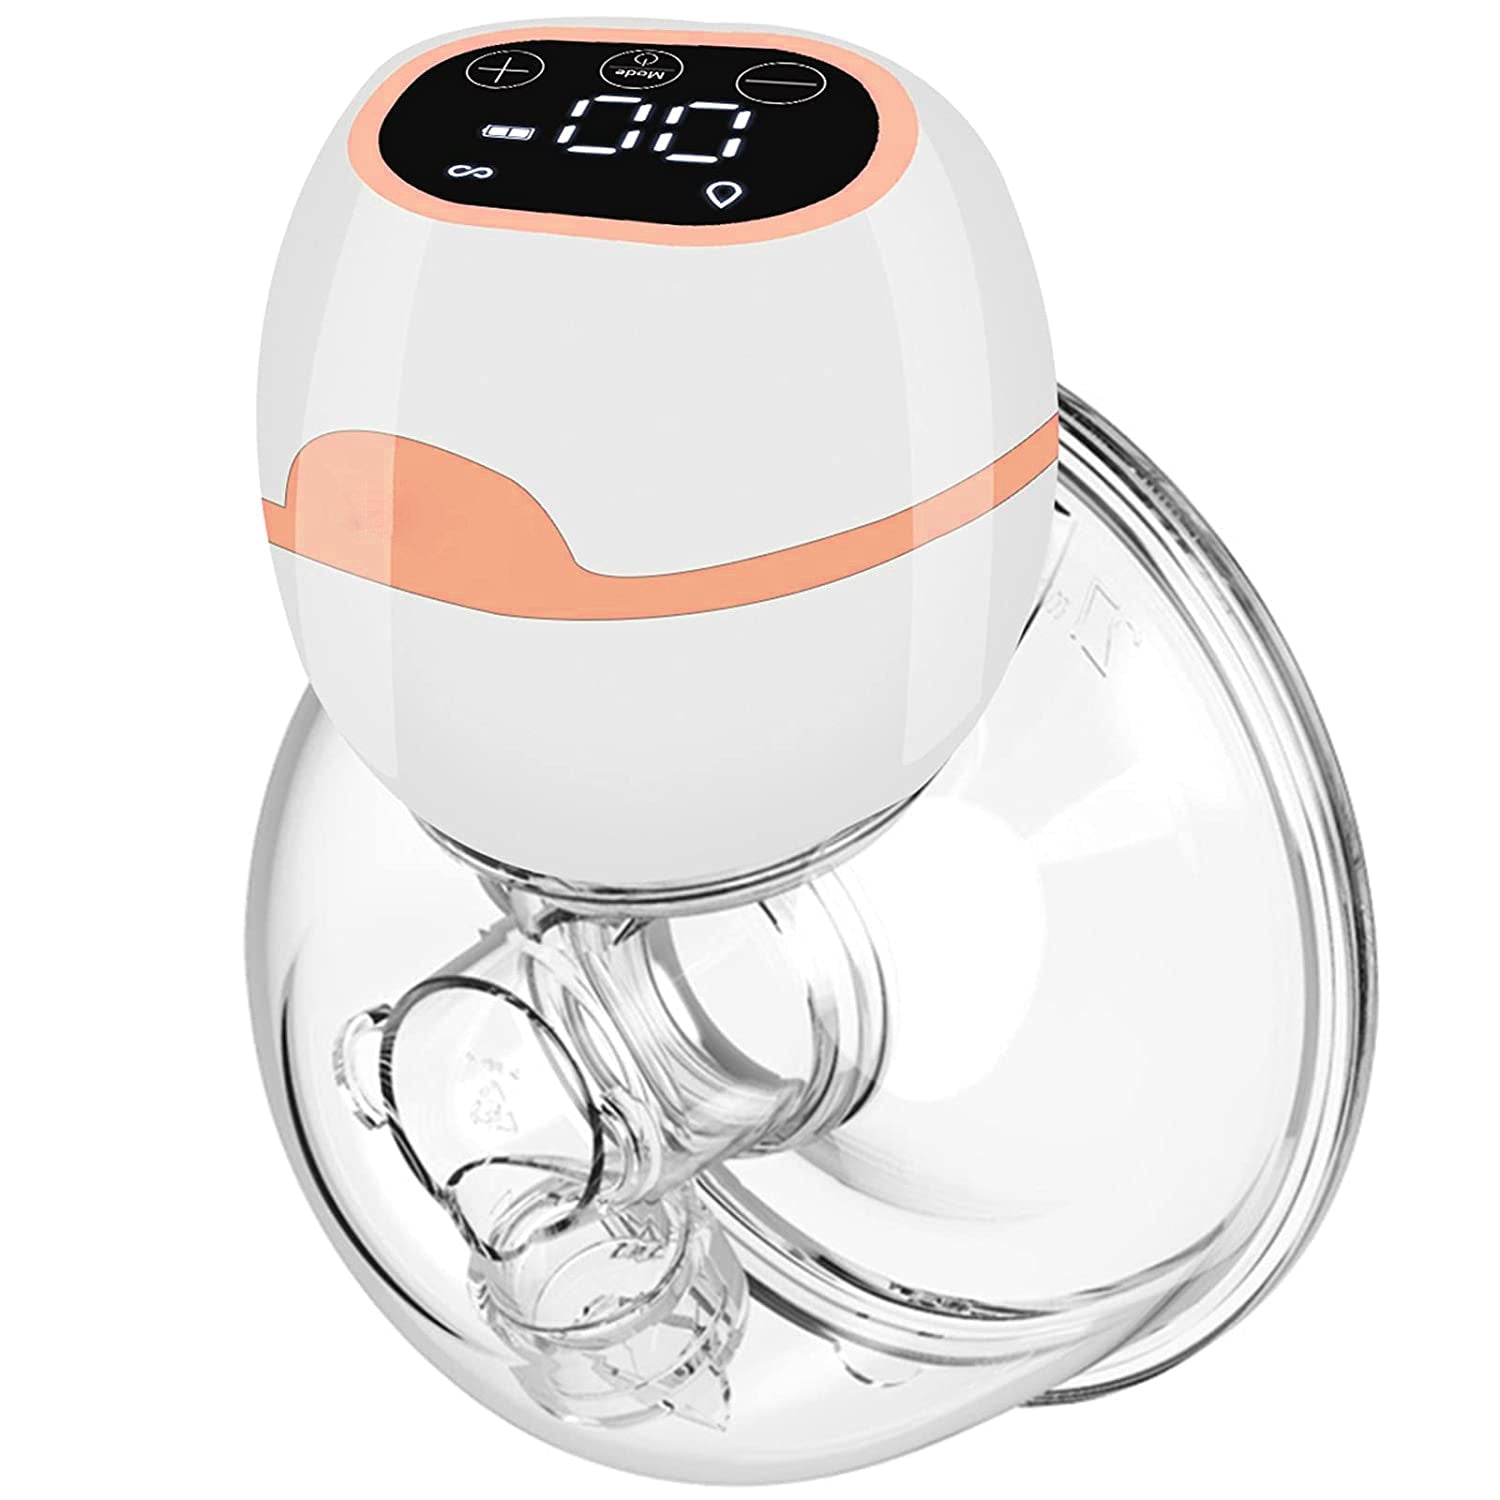 Electric Breast Pump Vinmall Wearable Breastfeeding Pump, 3 Modes & 9 Levels Strong Suction Power Quiet Milk Extractor (Single)